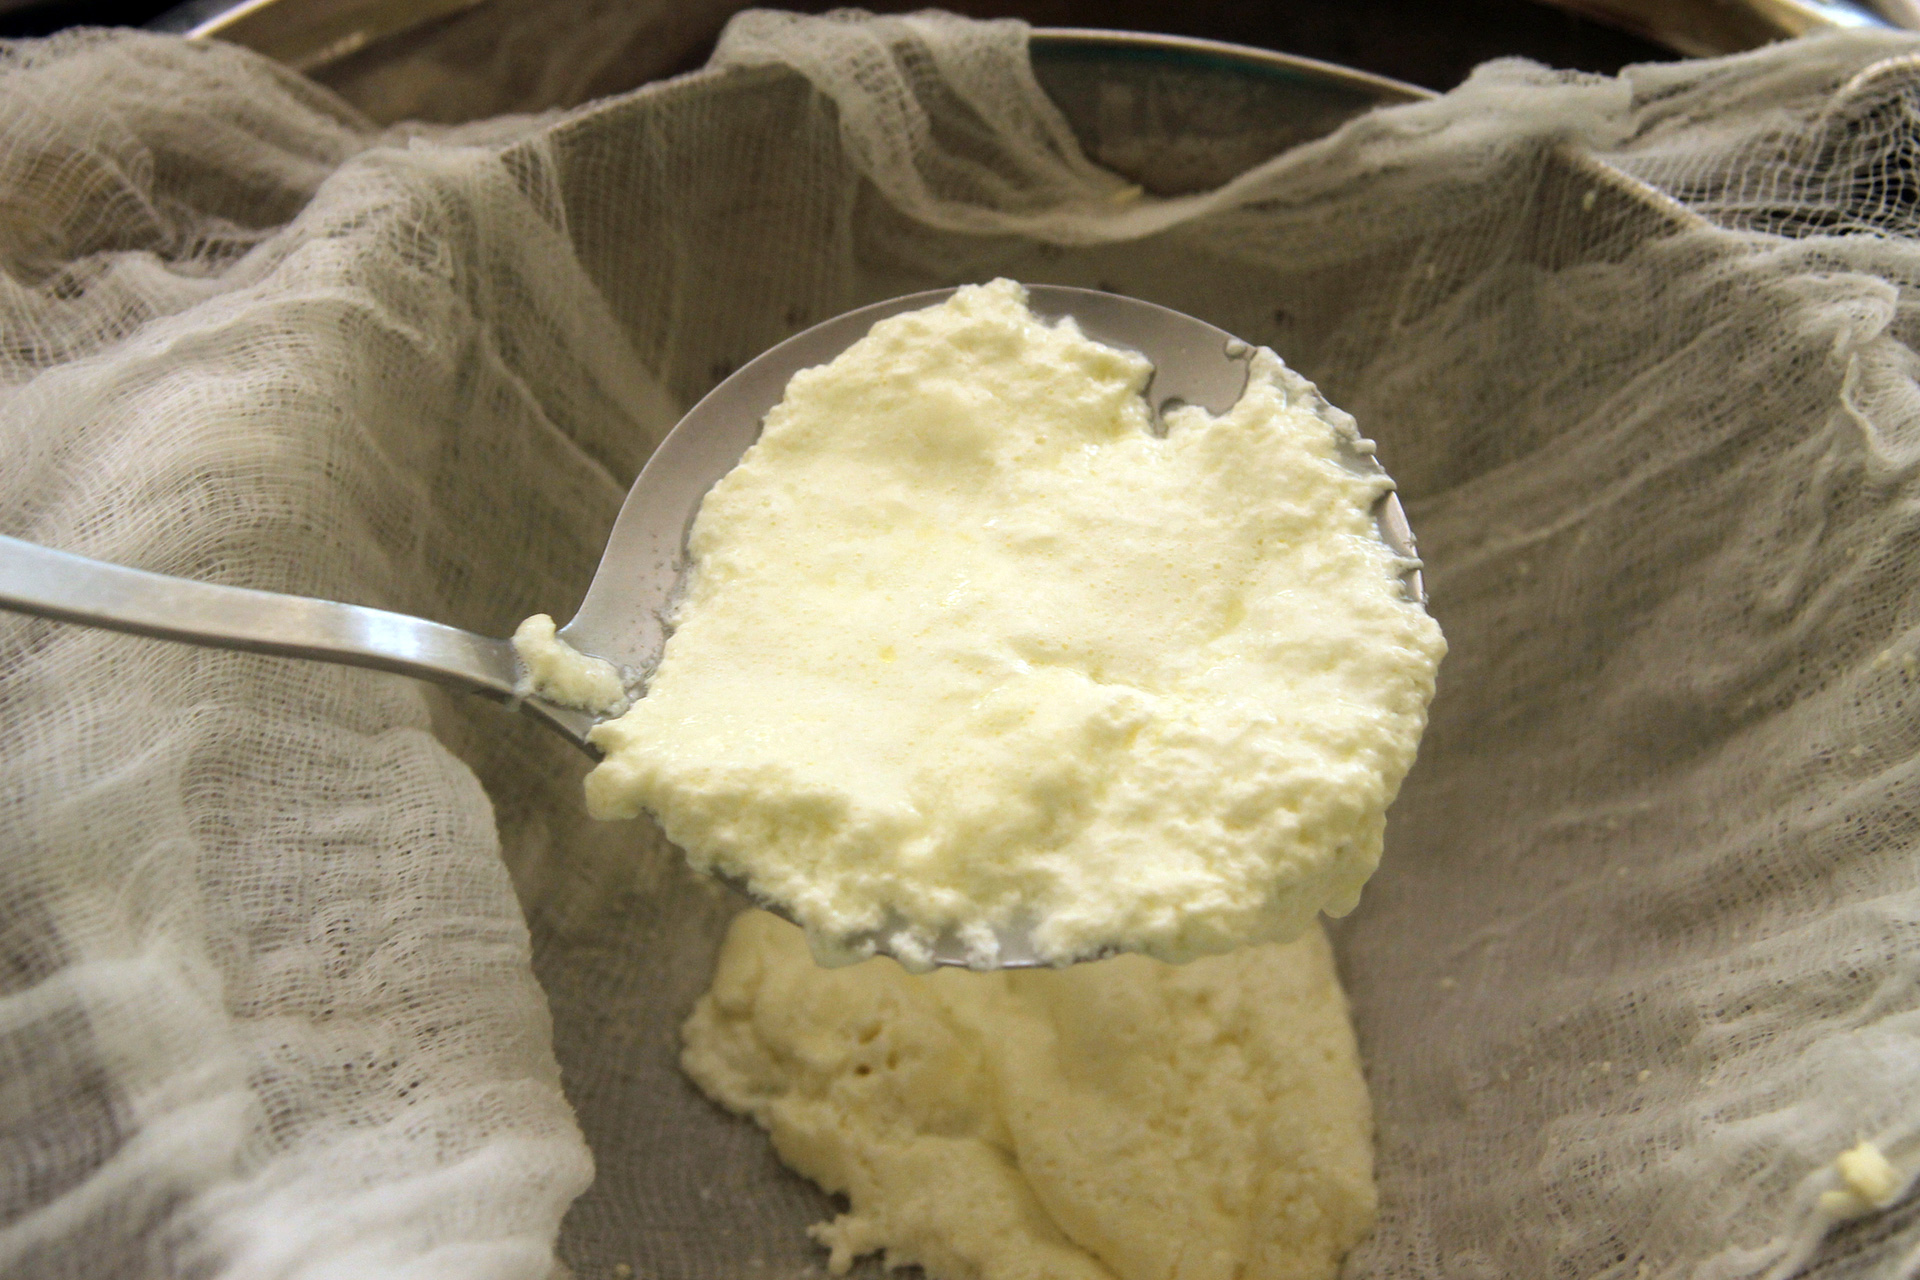 Scoop out the curds using a slotted spoon and let them drain in cheesecloth-lined strainer.